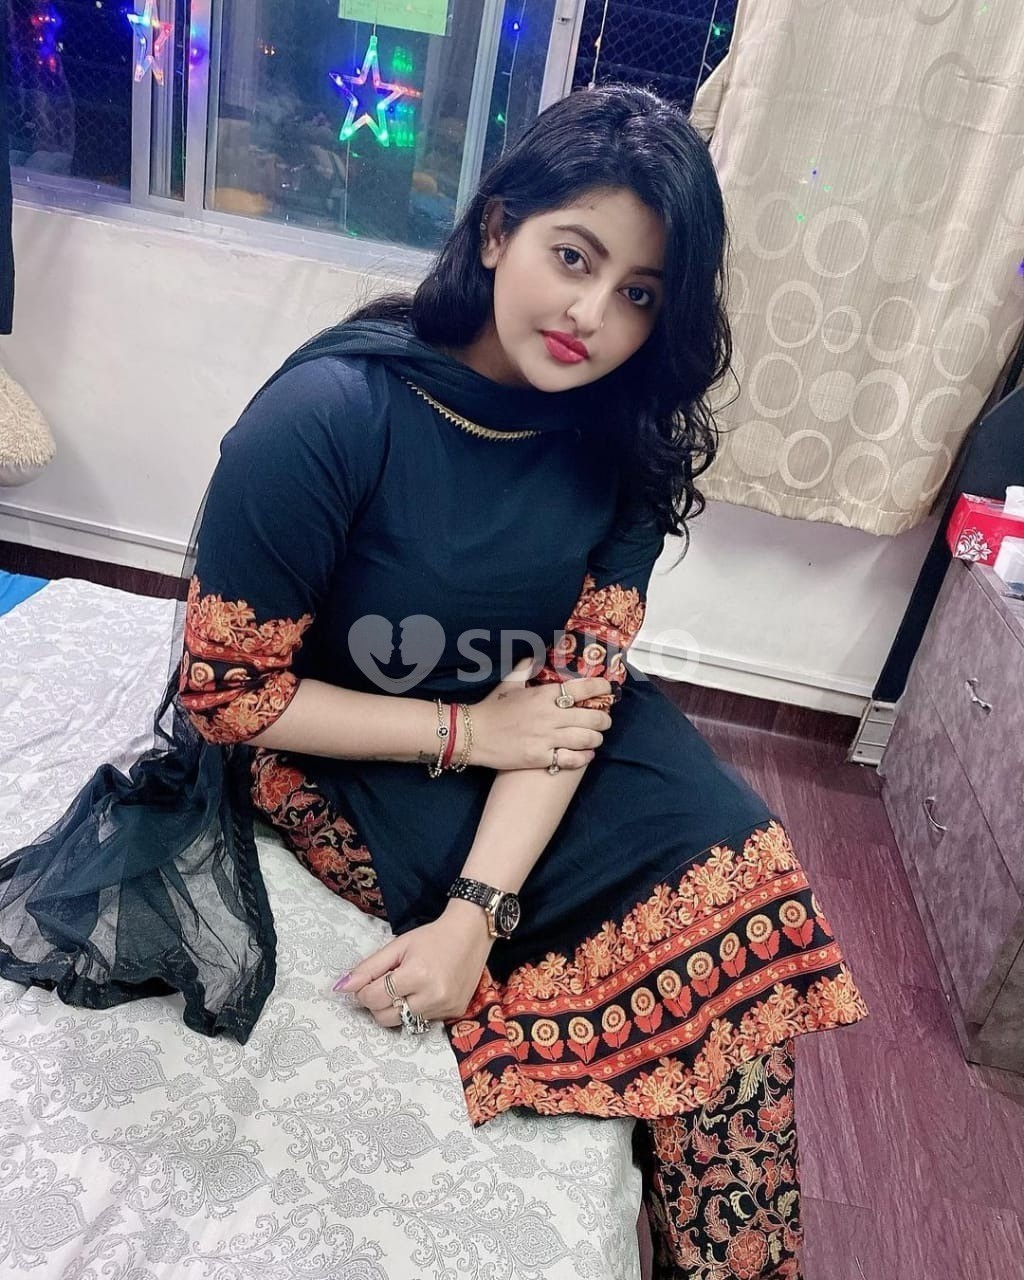 Ambala. 🔅  LOW RATE(Sonal)ESCORT FULL HARD FUCK WITH NAUGHTY IF YOU WANT TO FUCK MY PUSSY WITH BIG BOOBS GIRLS- CALL 